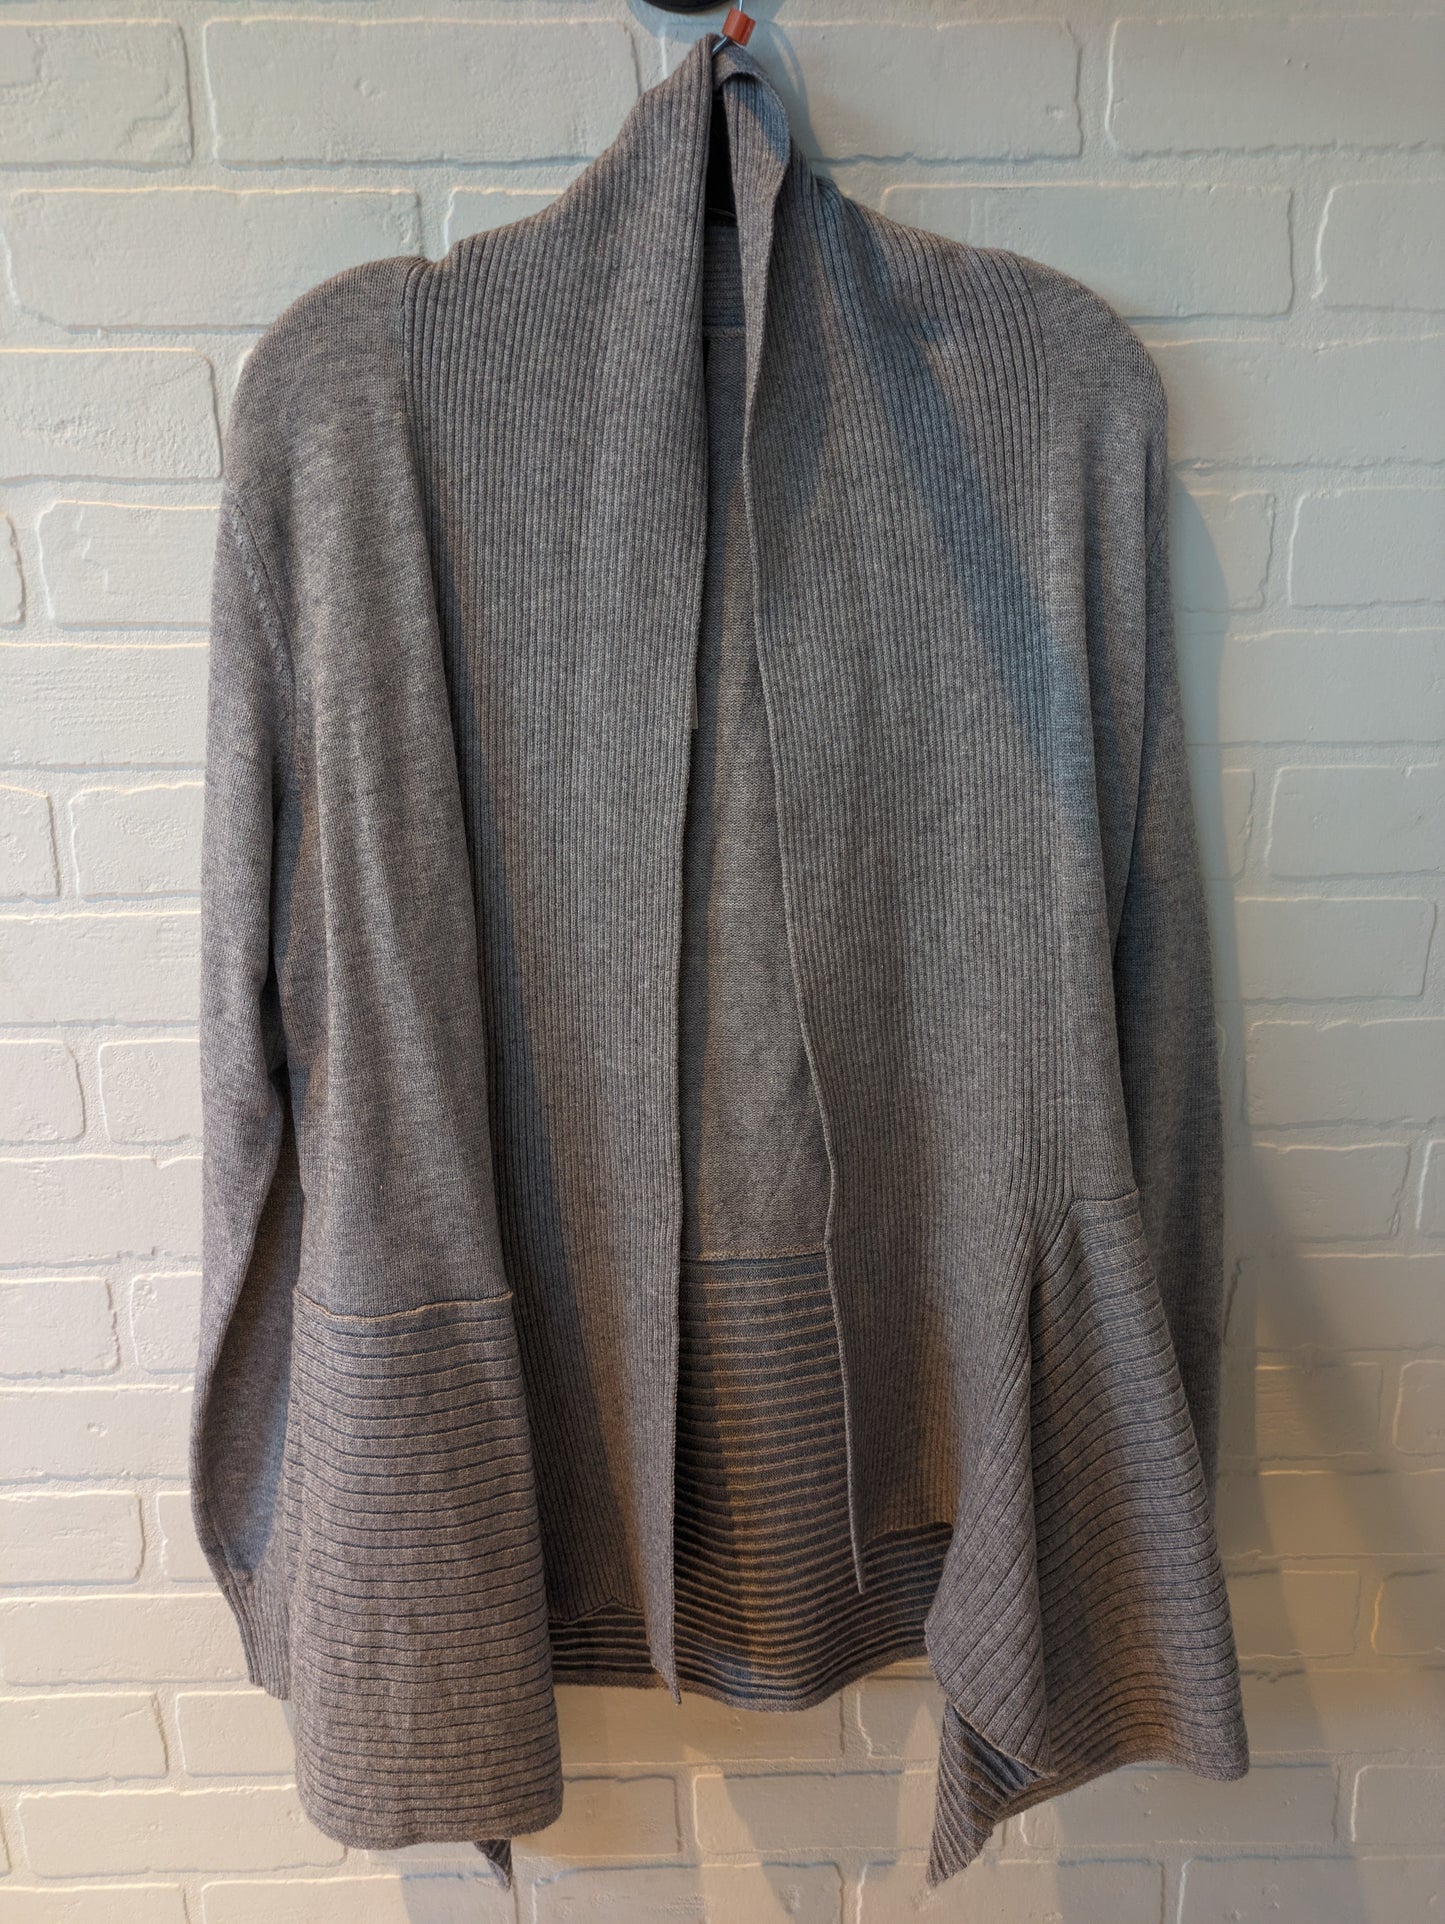 Sweater Cardigan By Premise  Size: L